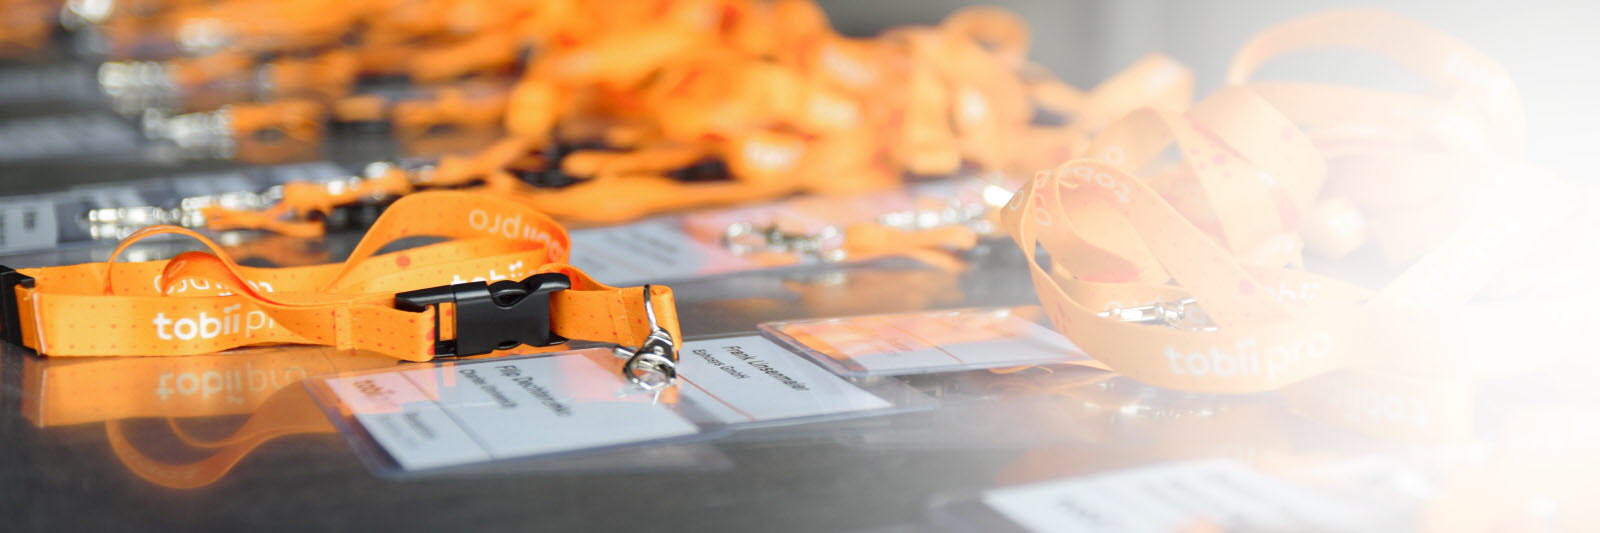 Tobii Pro conference badges on a table